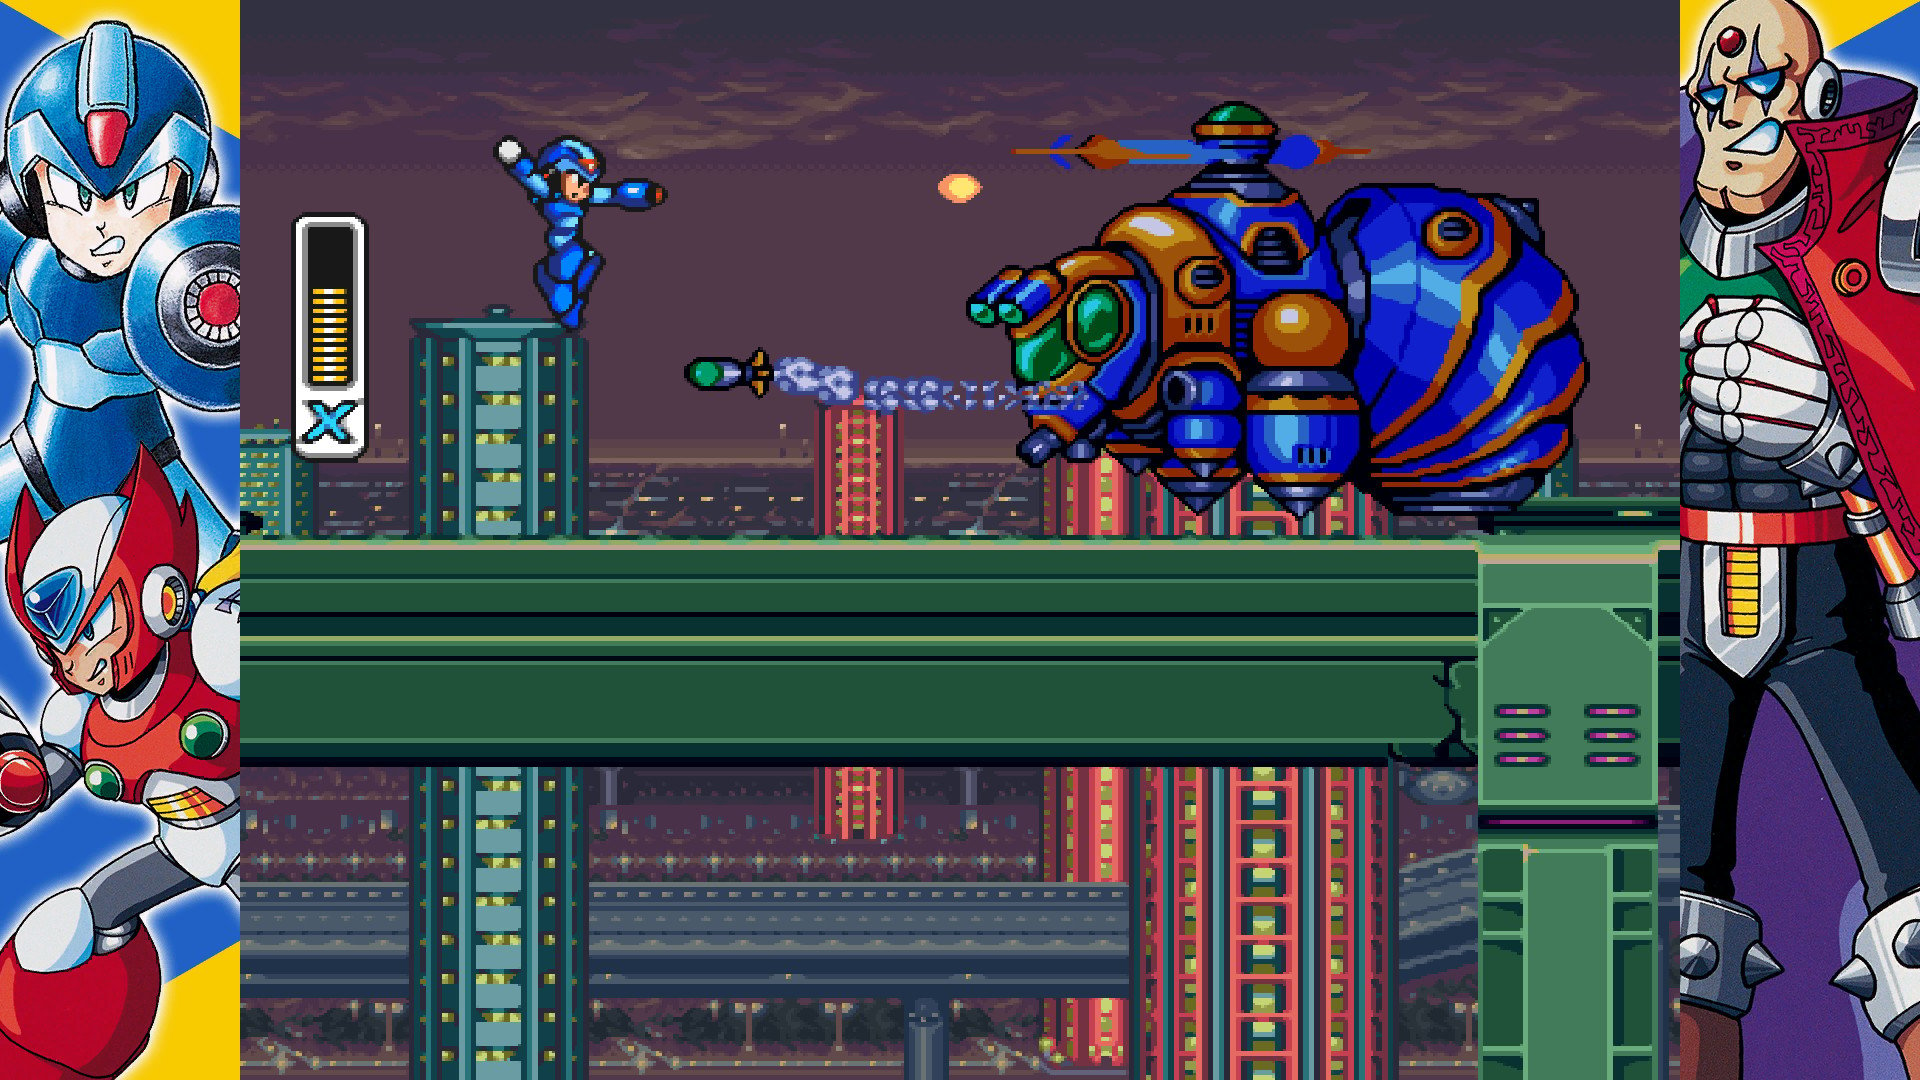 Once in a while I do not forget that Mega Man X is platforming perfection